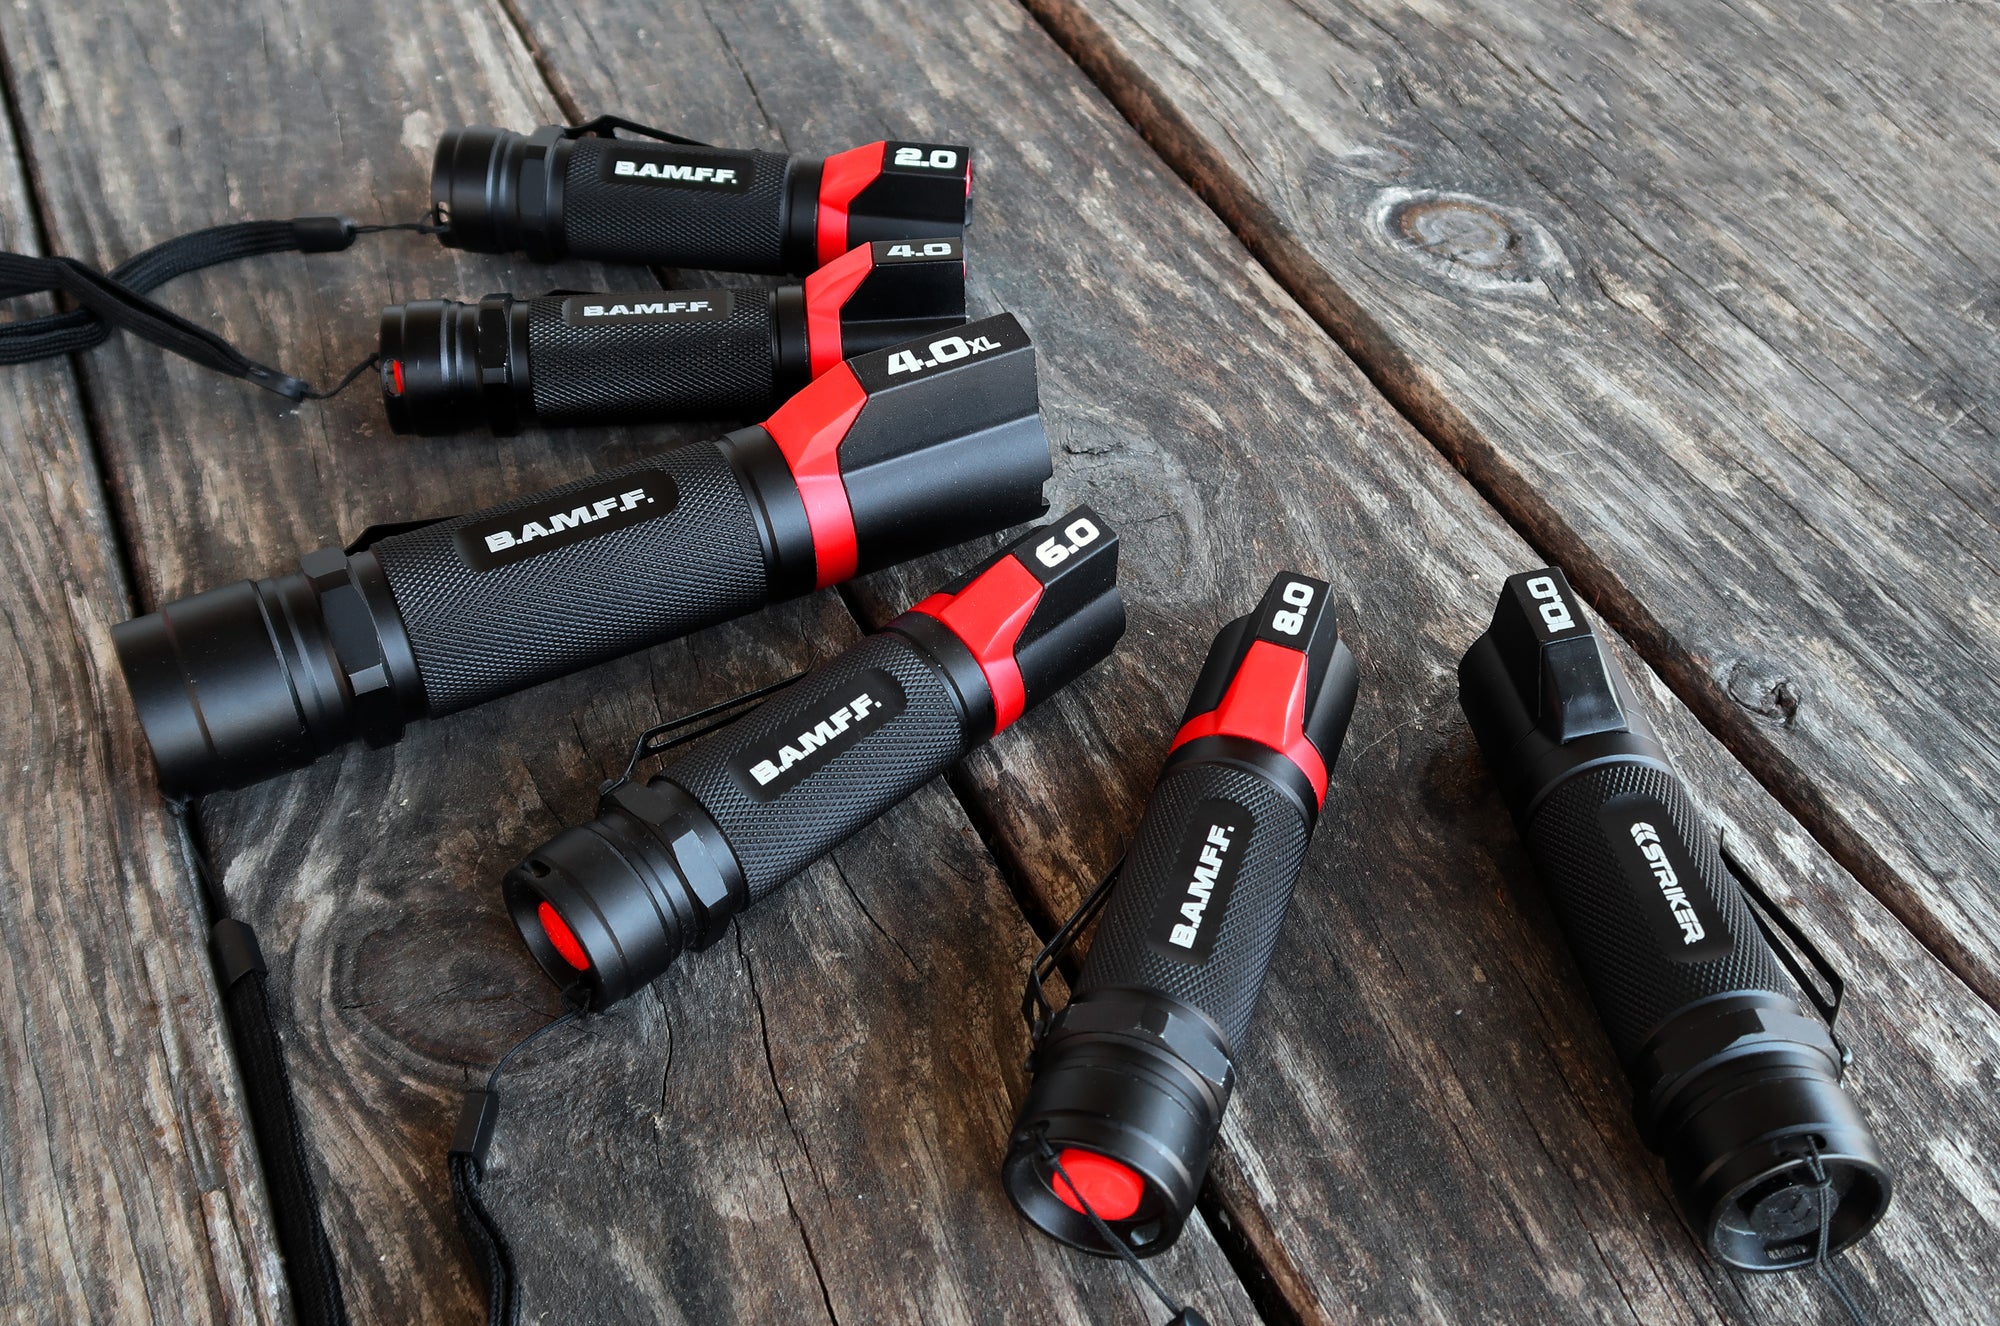 The BAMFF family lineup of STKR Tactical Flashlights